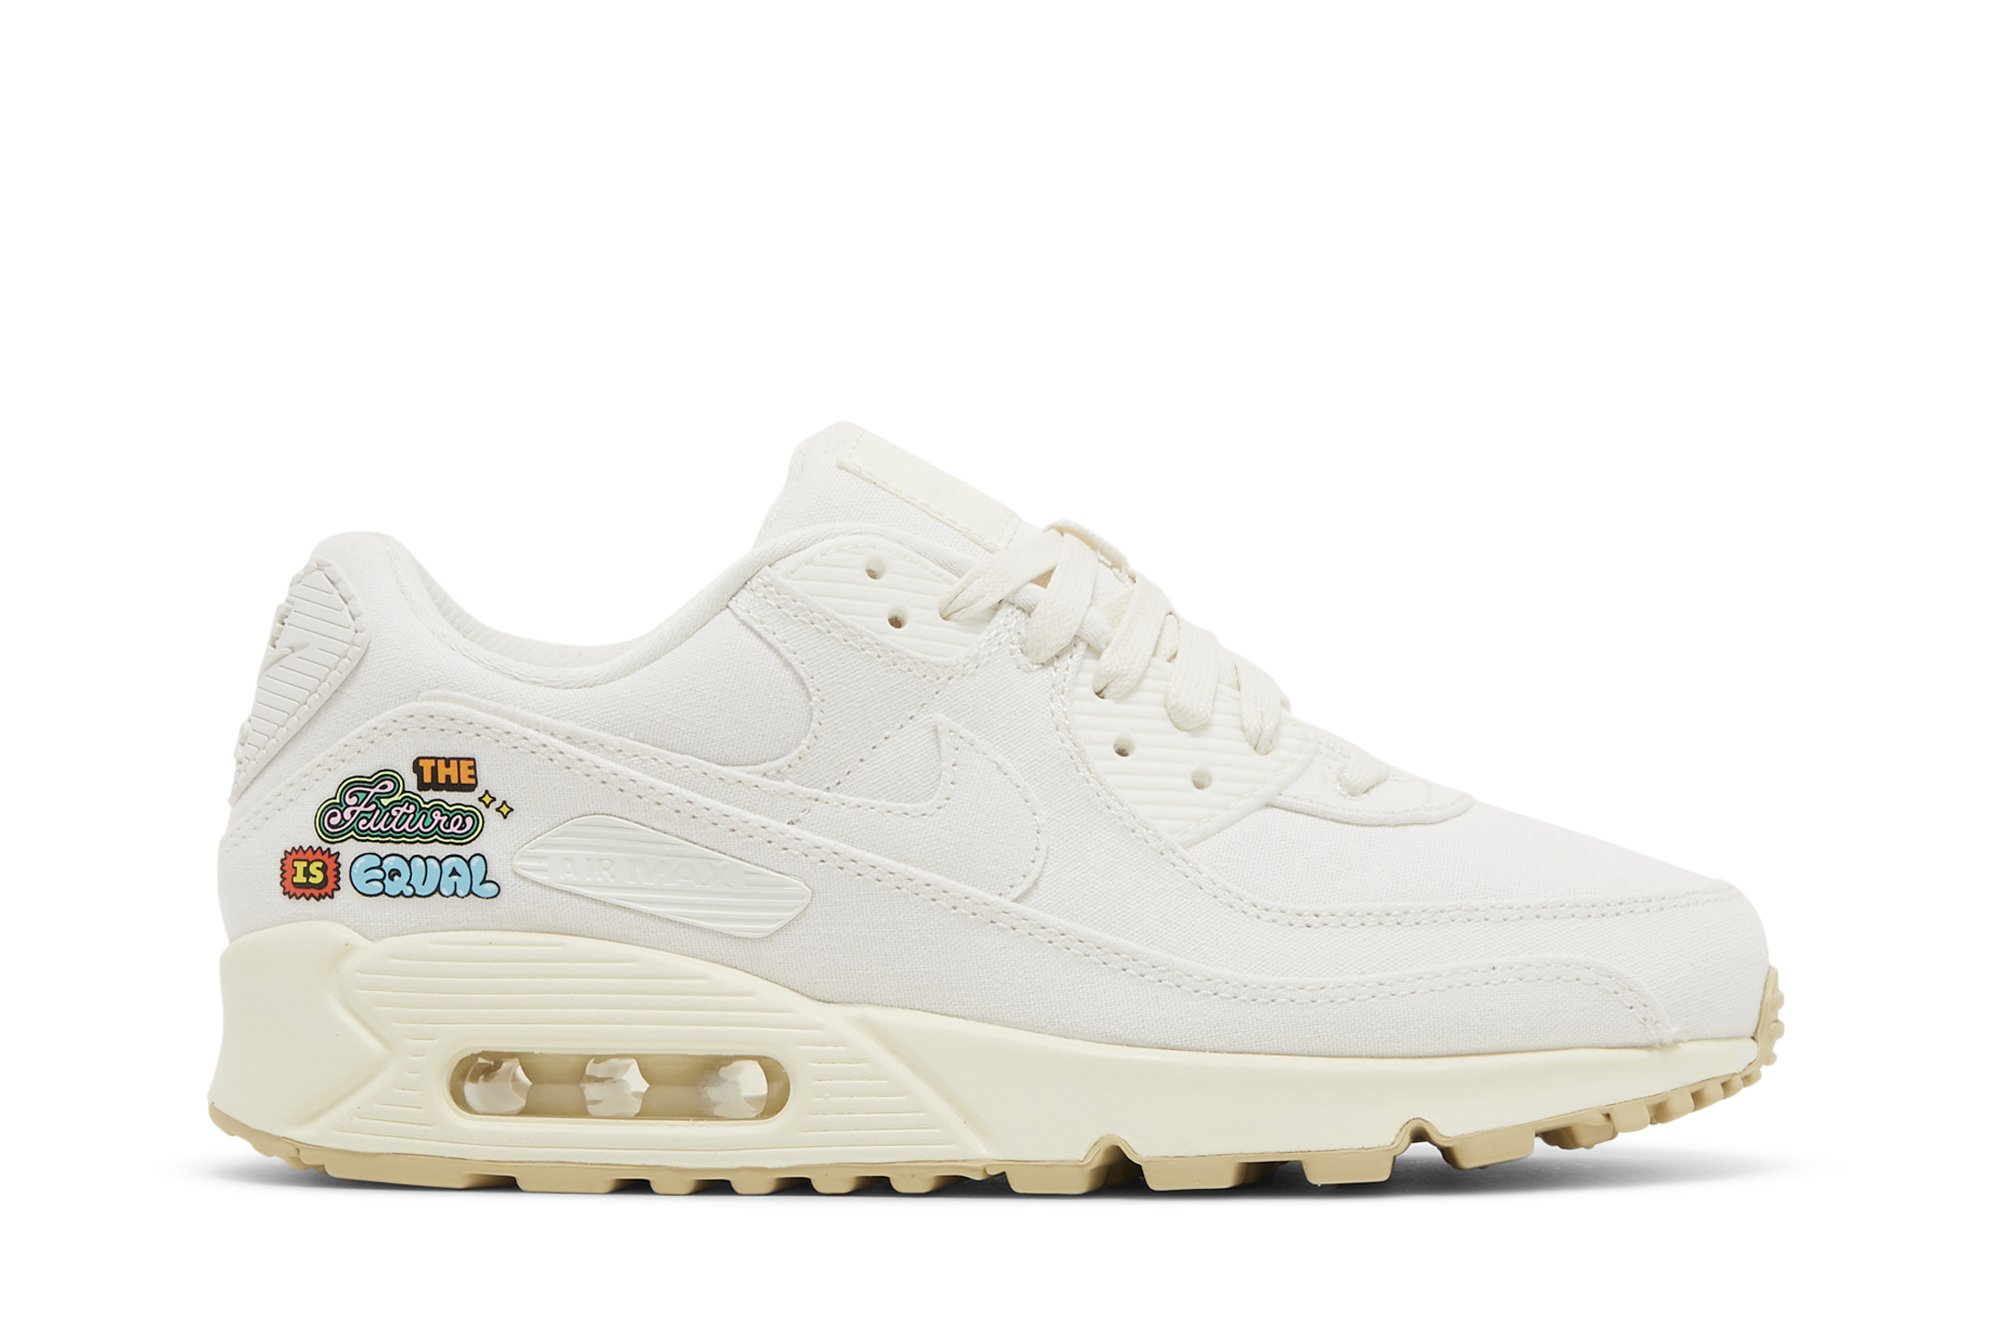 Wmns Air Max 90 SE 'The Future is Equal'